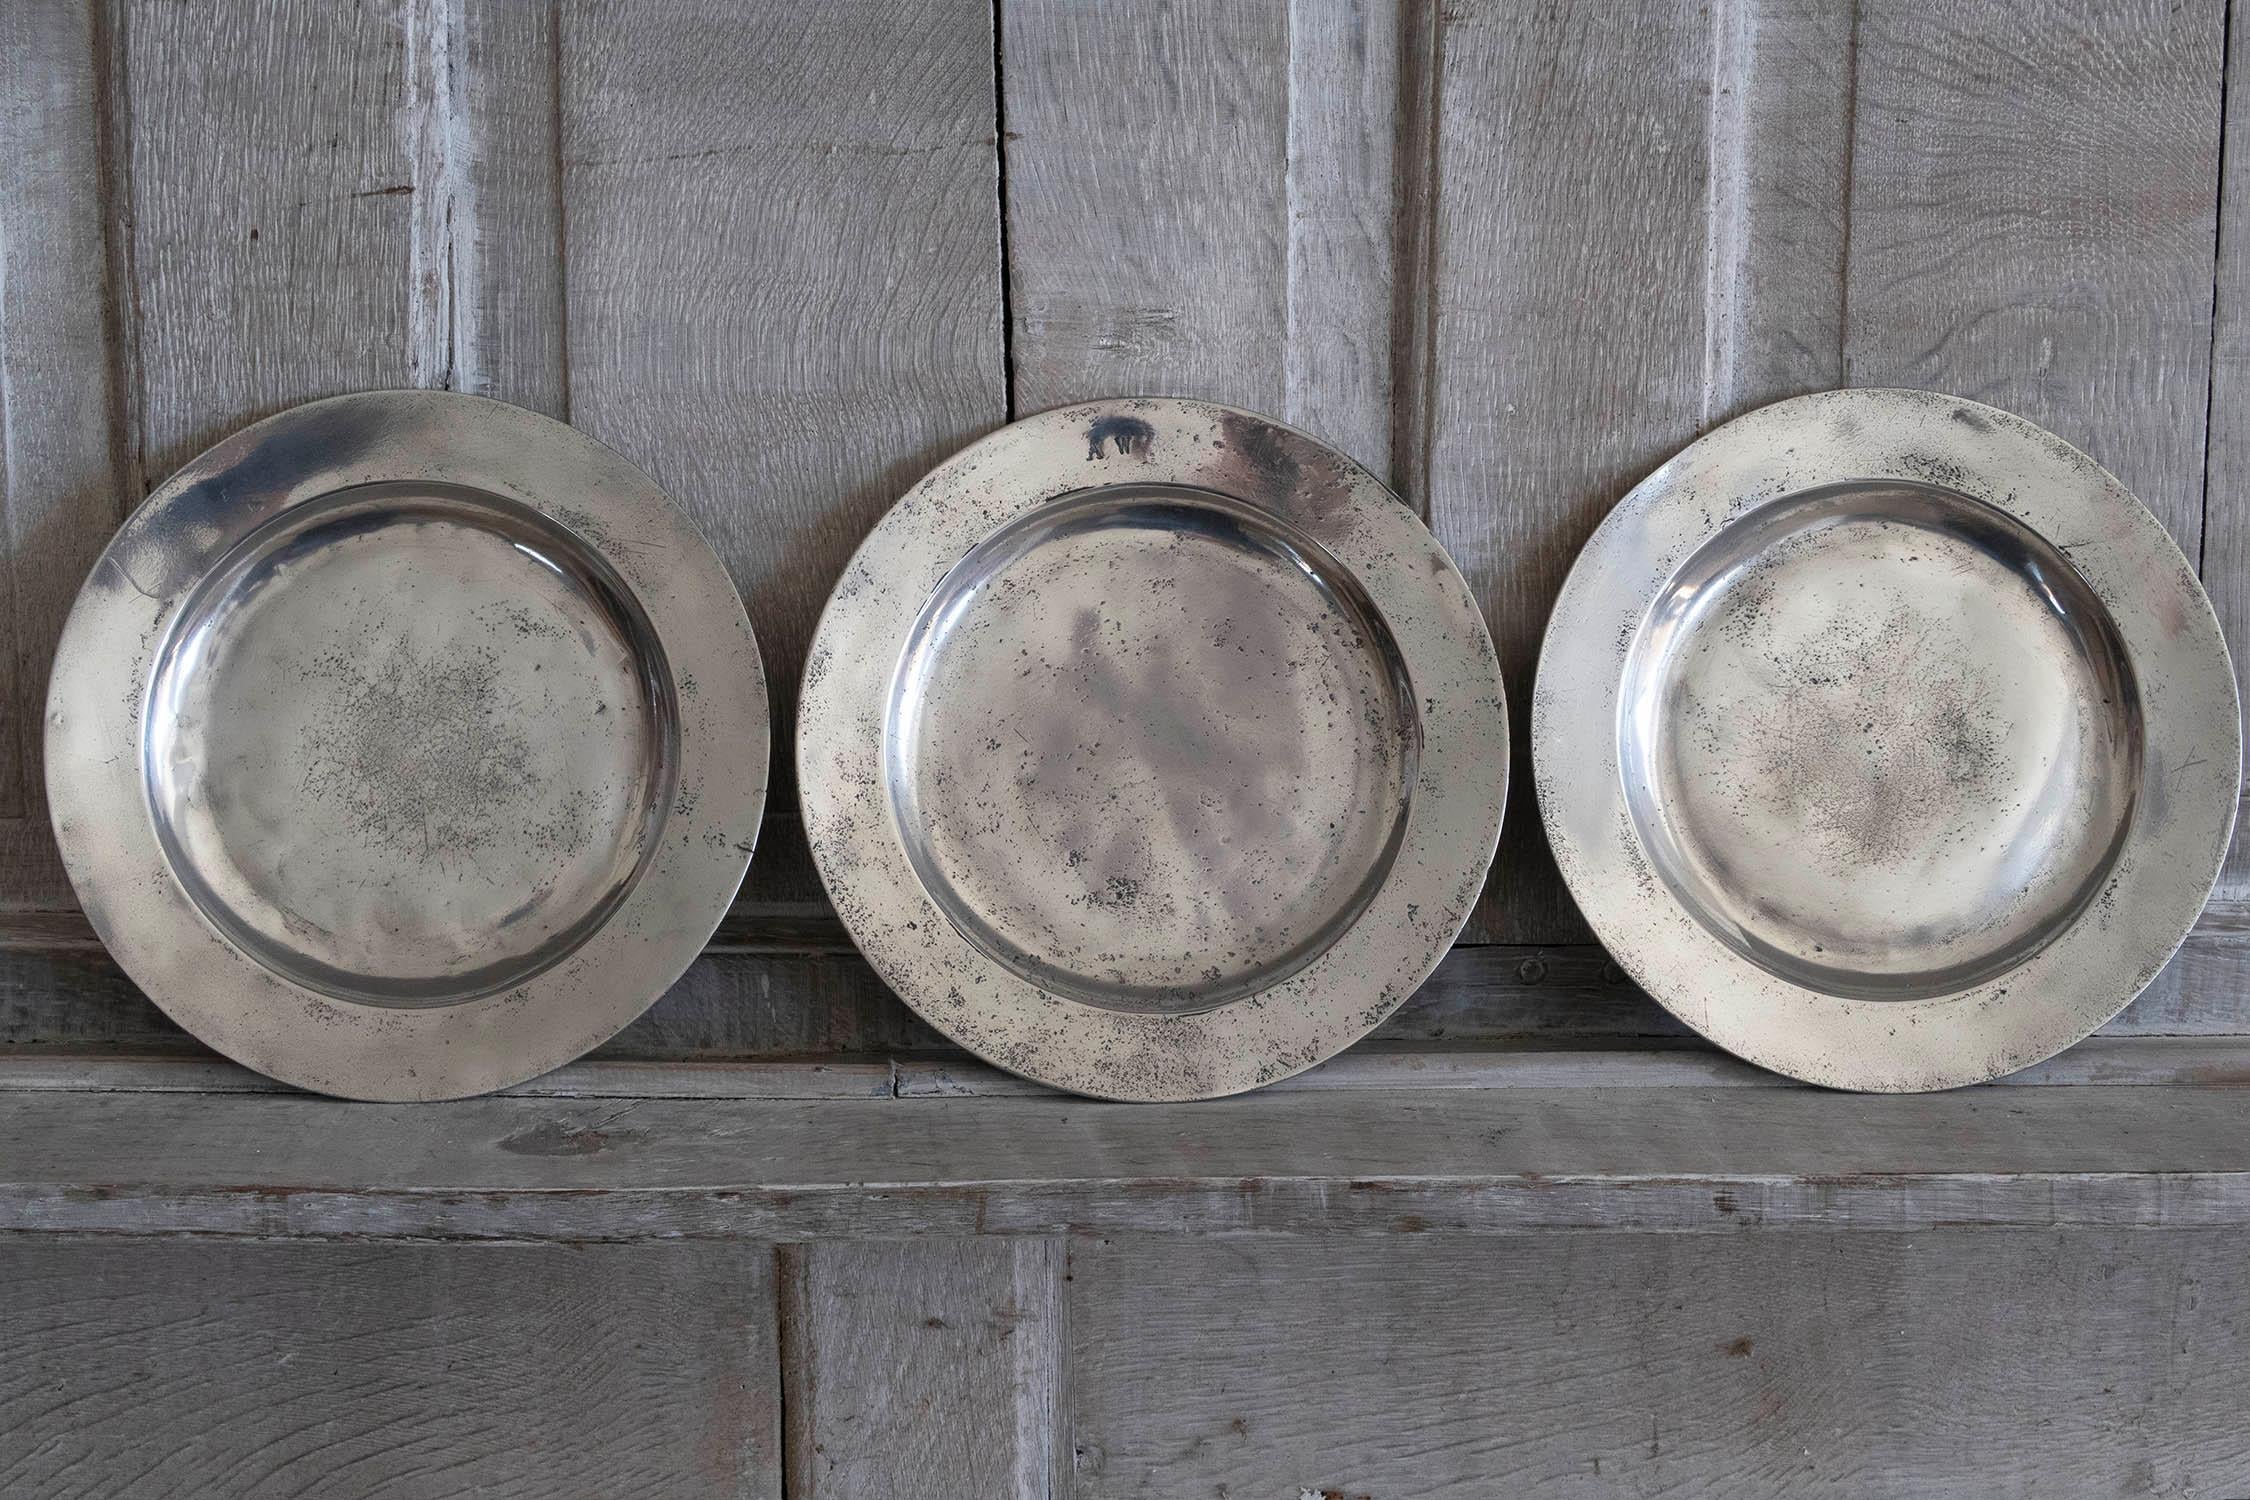 Lovely highly polished pewter plates.

All three with London touchmarks on the underside. One with ownership inscription on the front.

The pewter has been polished to its original shine to imitate polished silver. It was known as the Poor Man's